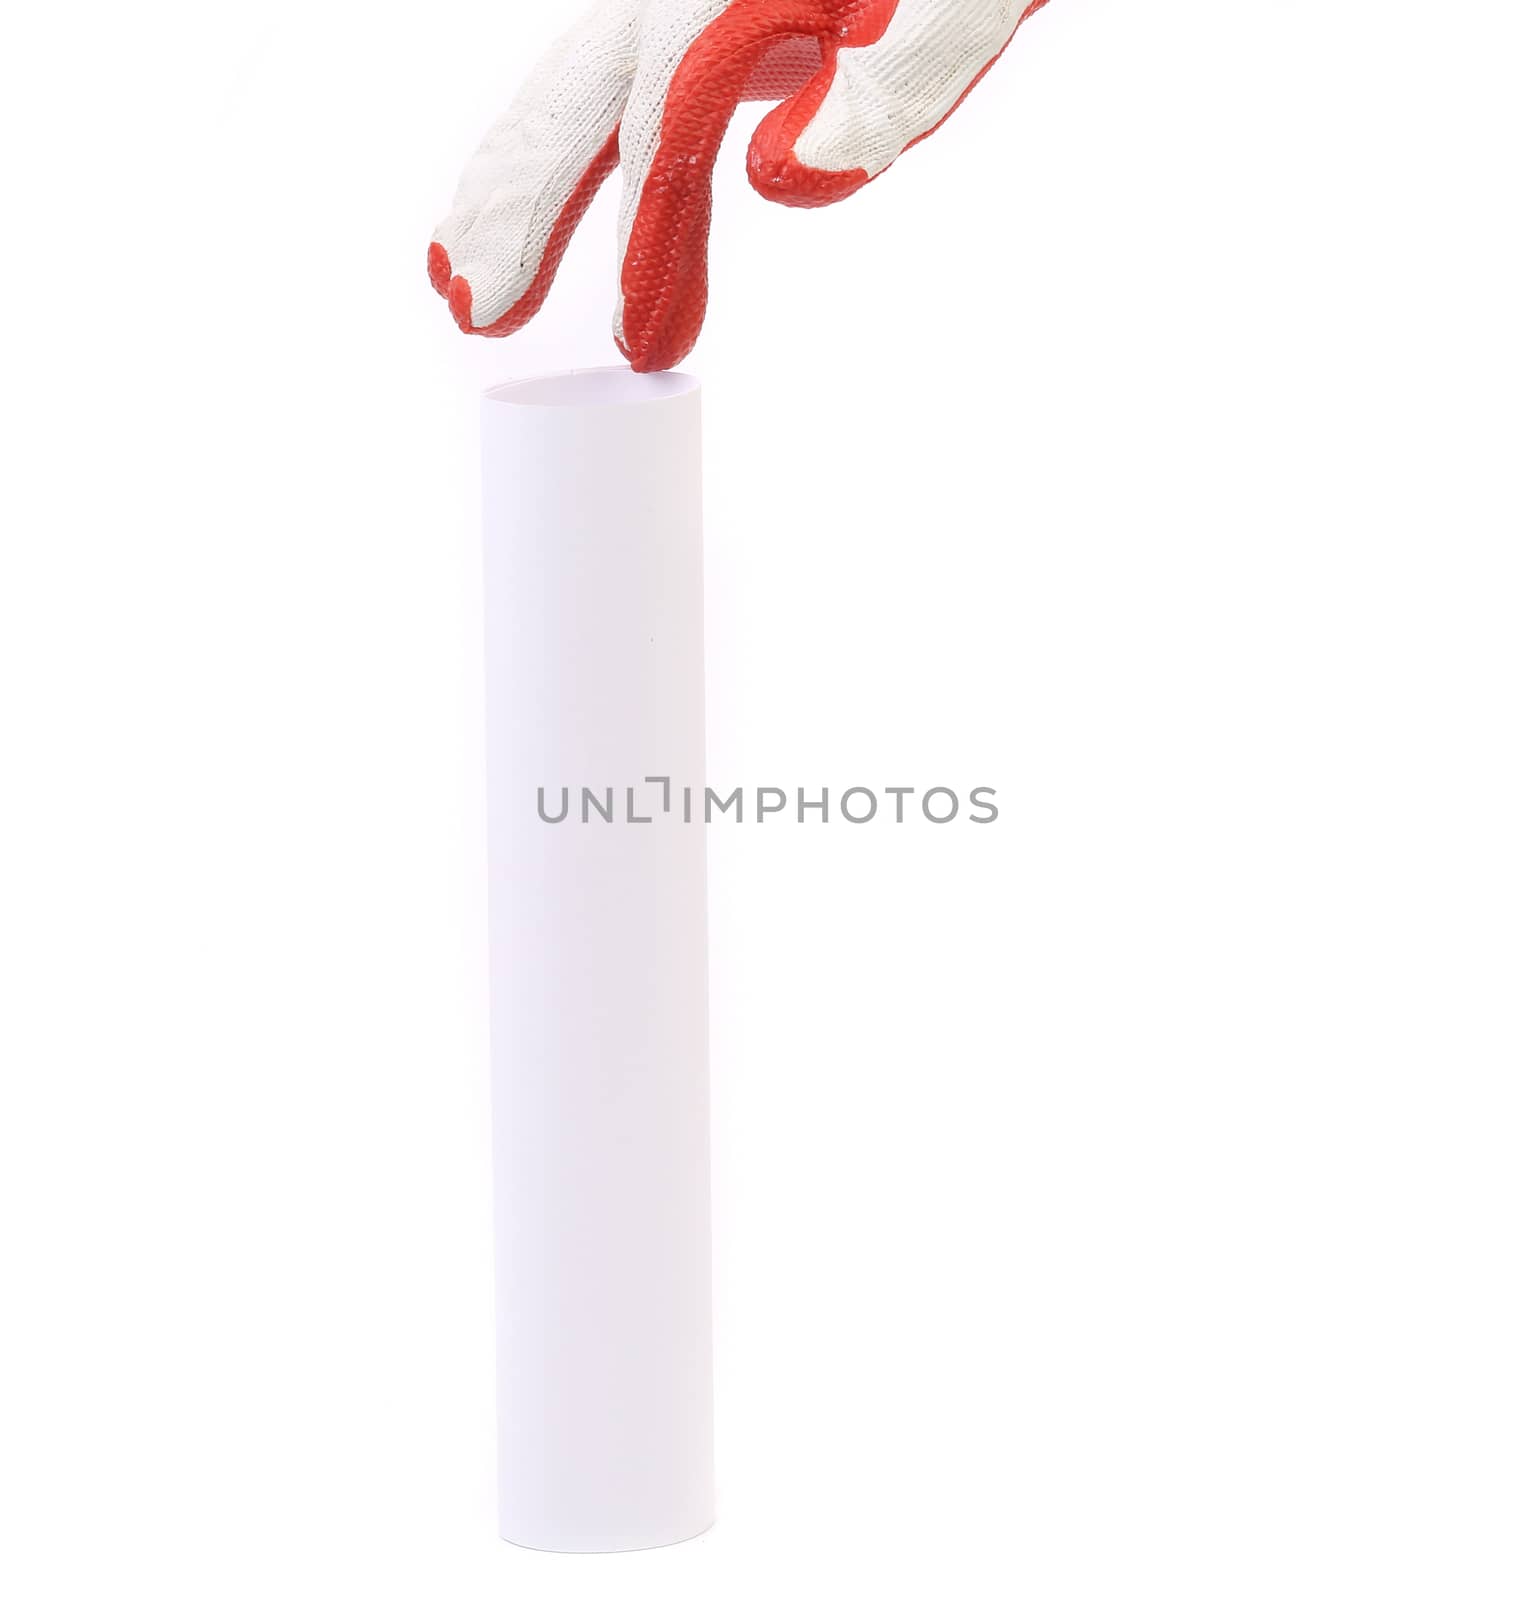 Man hand in red glove touching paper roll. Isolated on a white background.